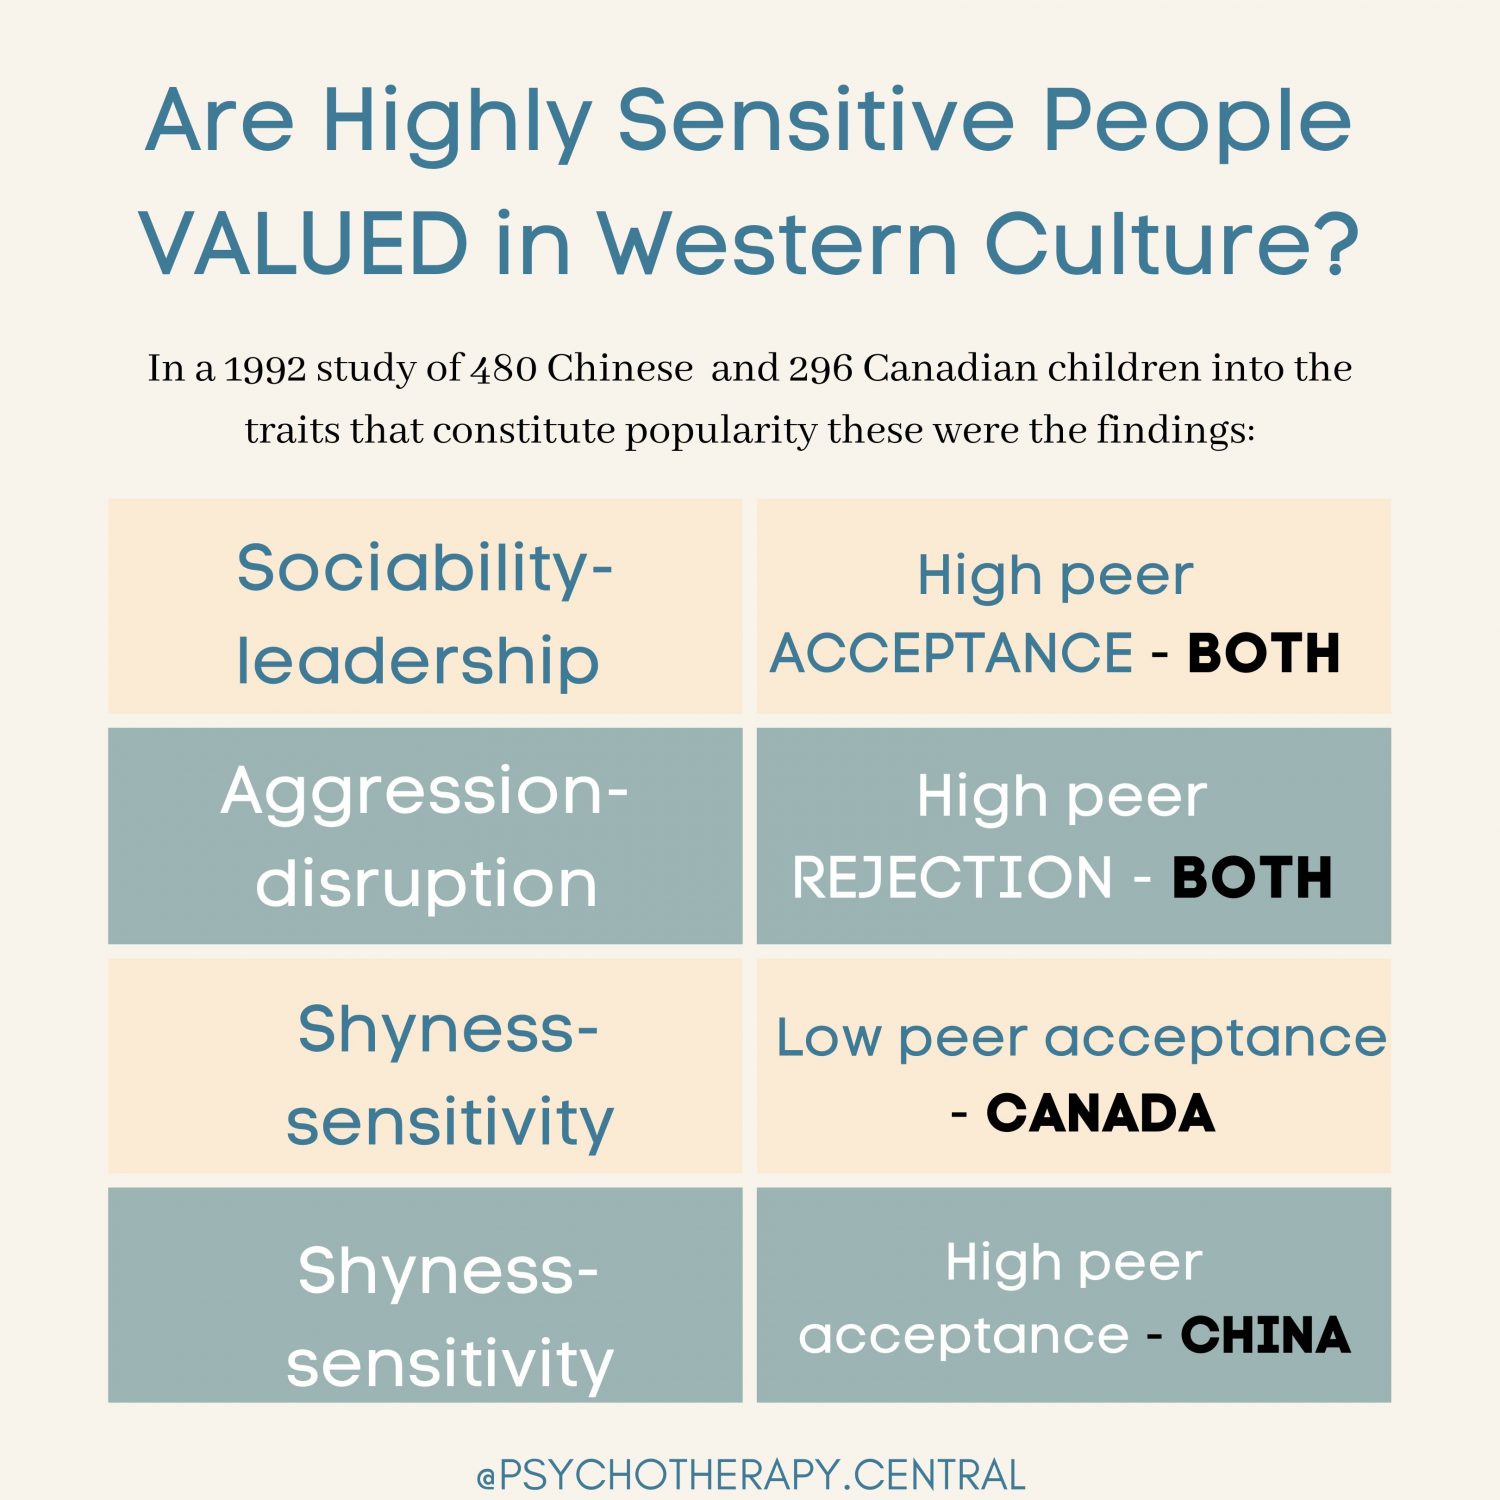 How are Highly Sensitive People VALUED in Western Culture